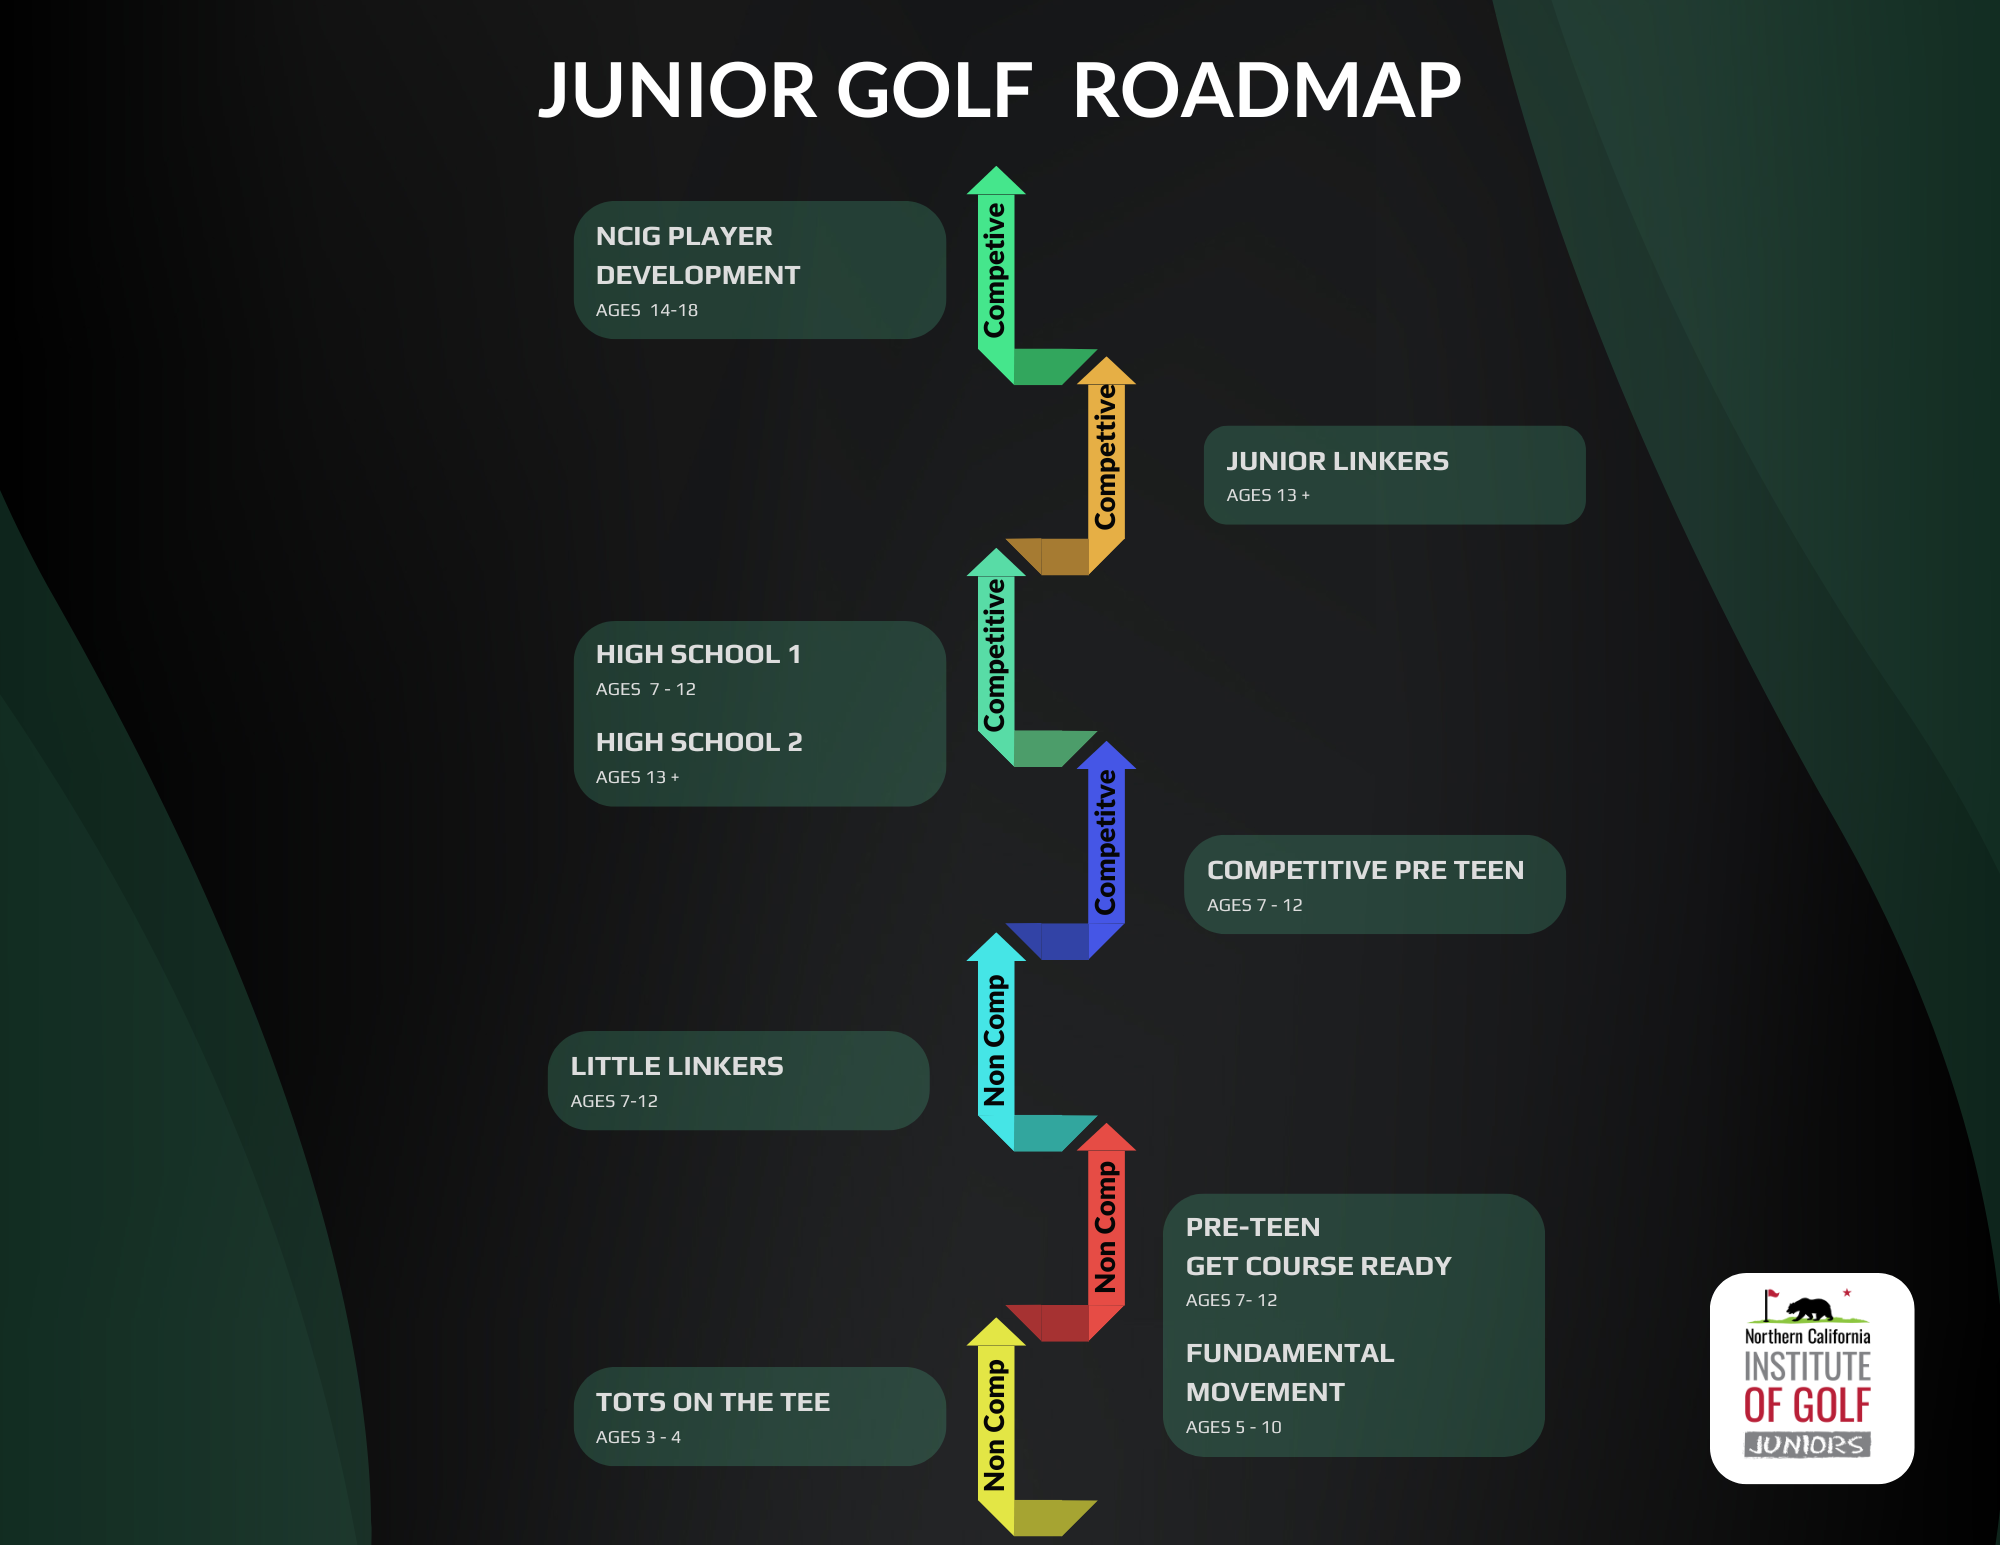 Road map of our Junior Golf Programs
